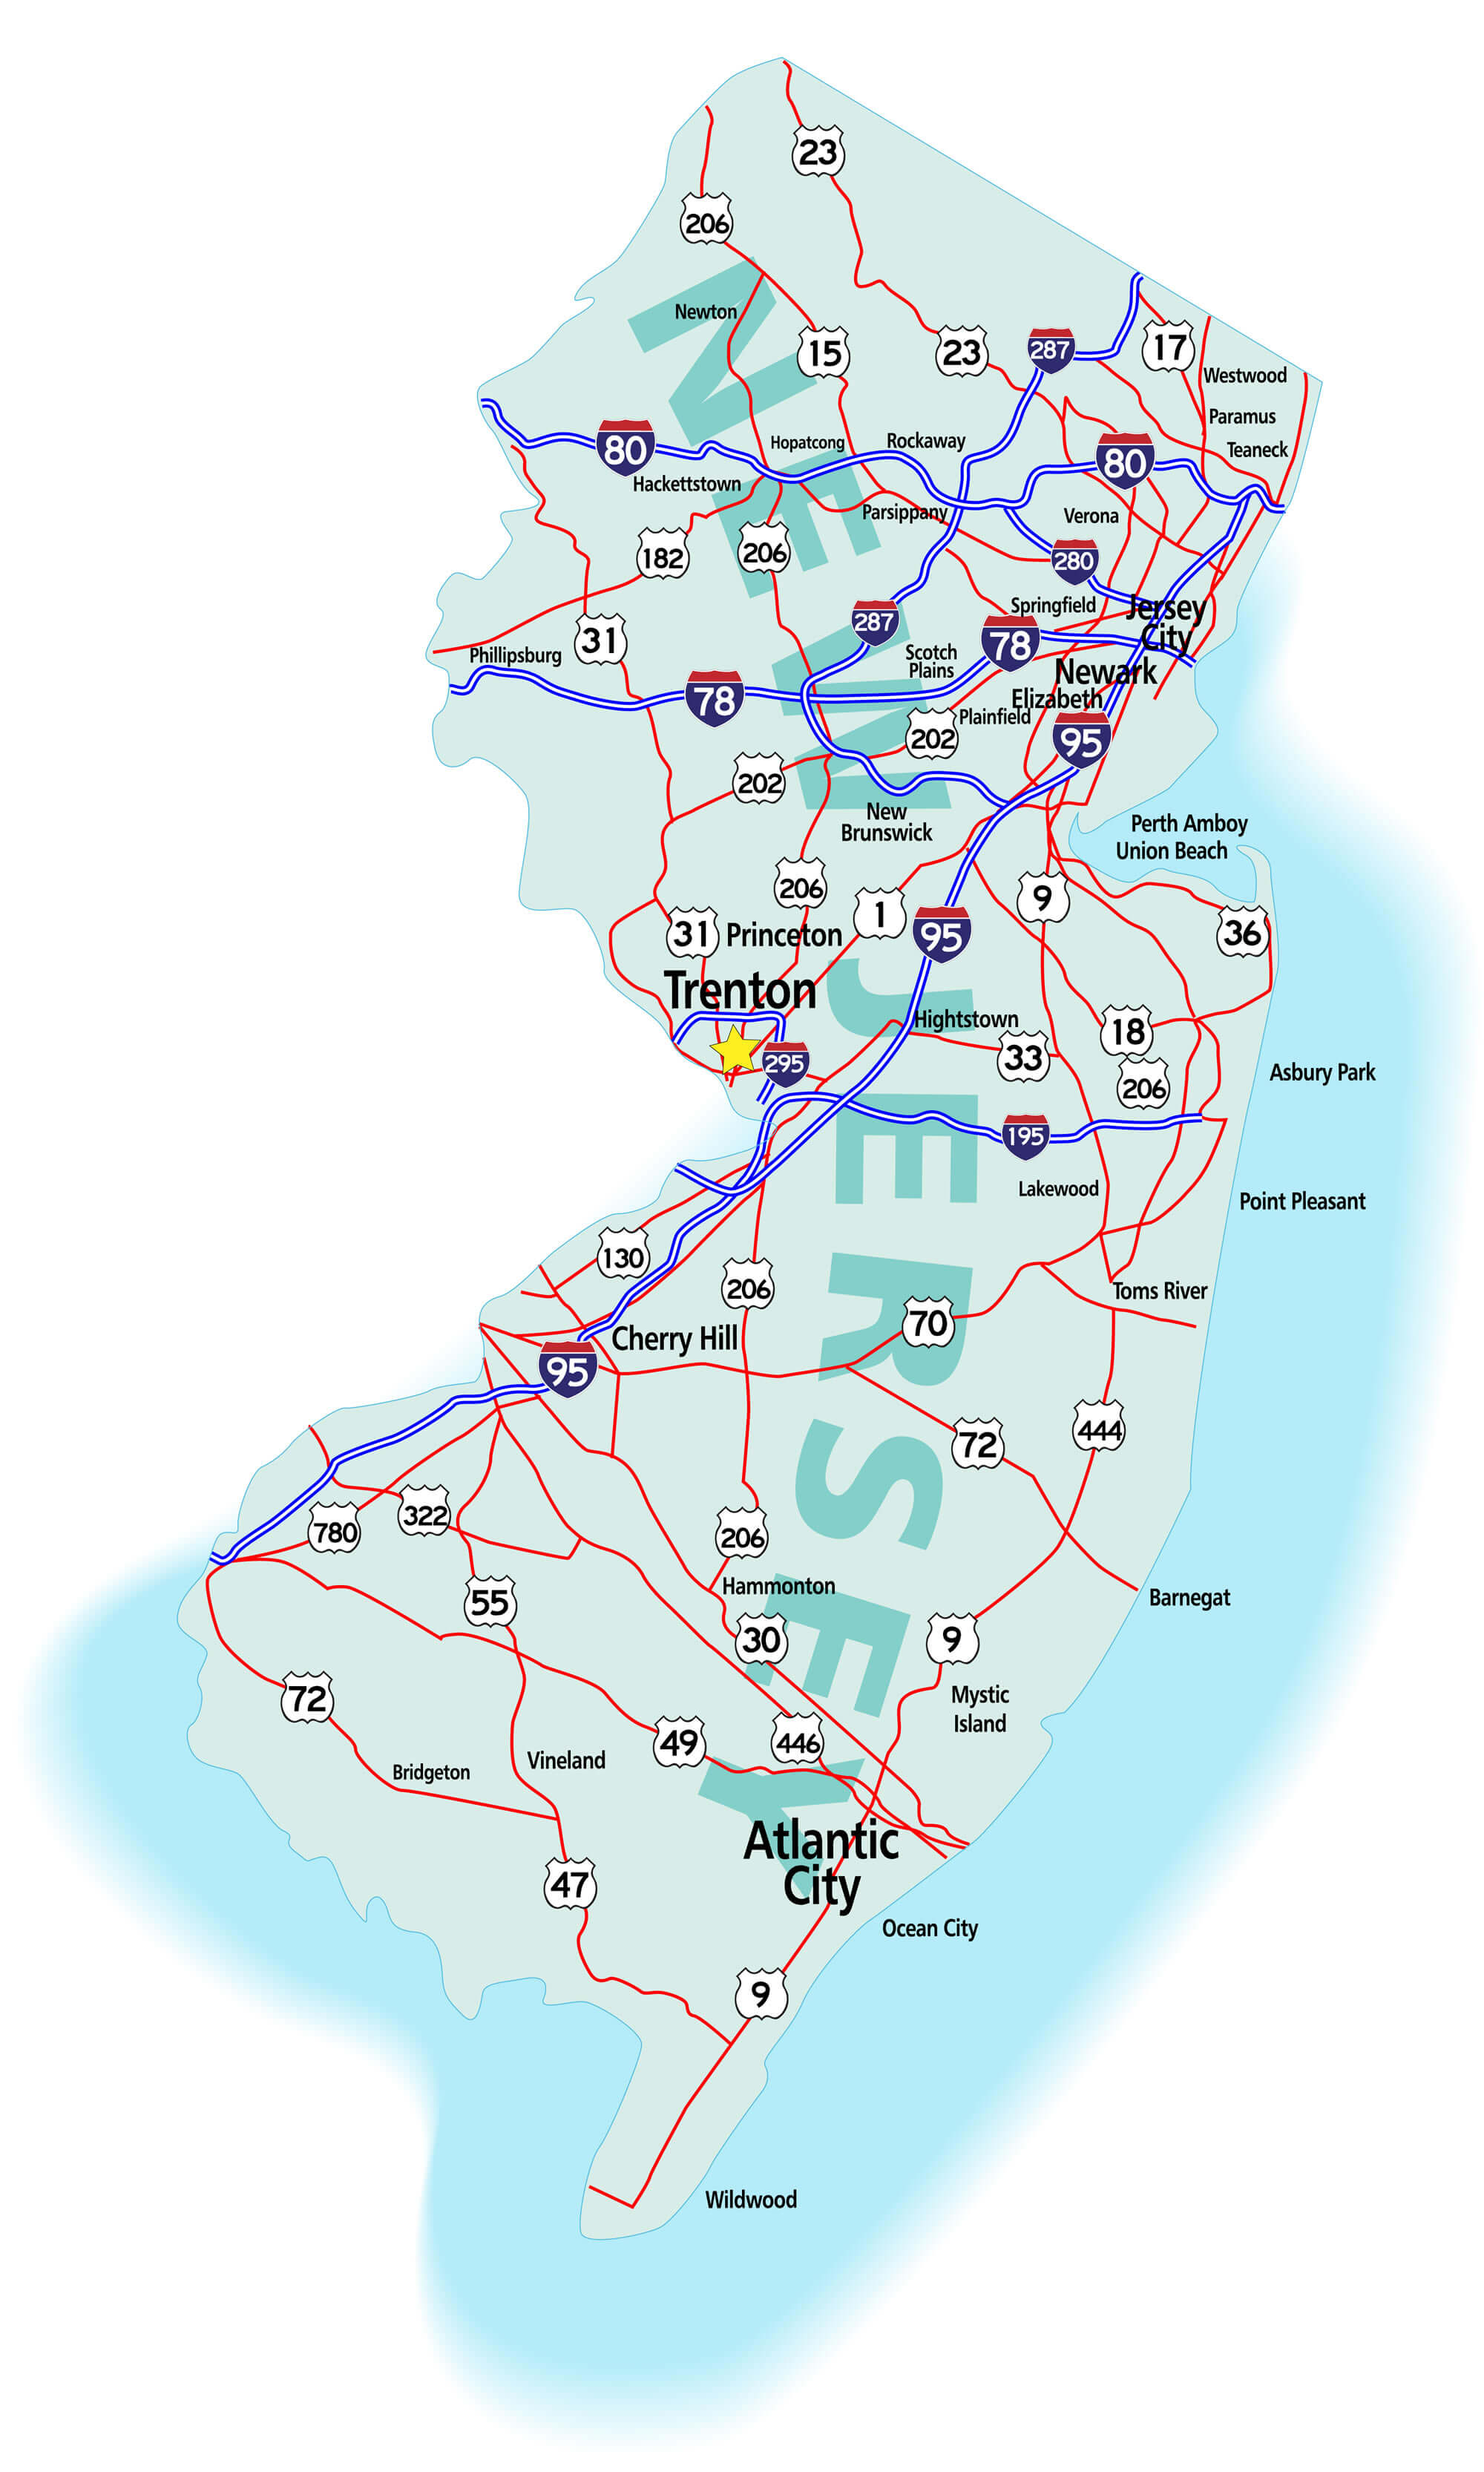 New Jersey state road map